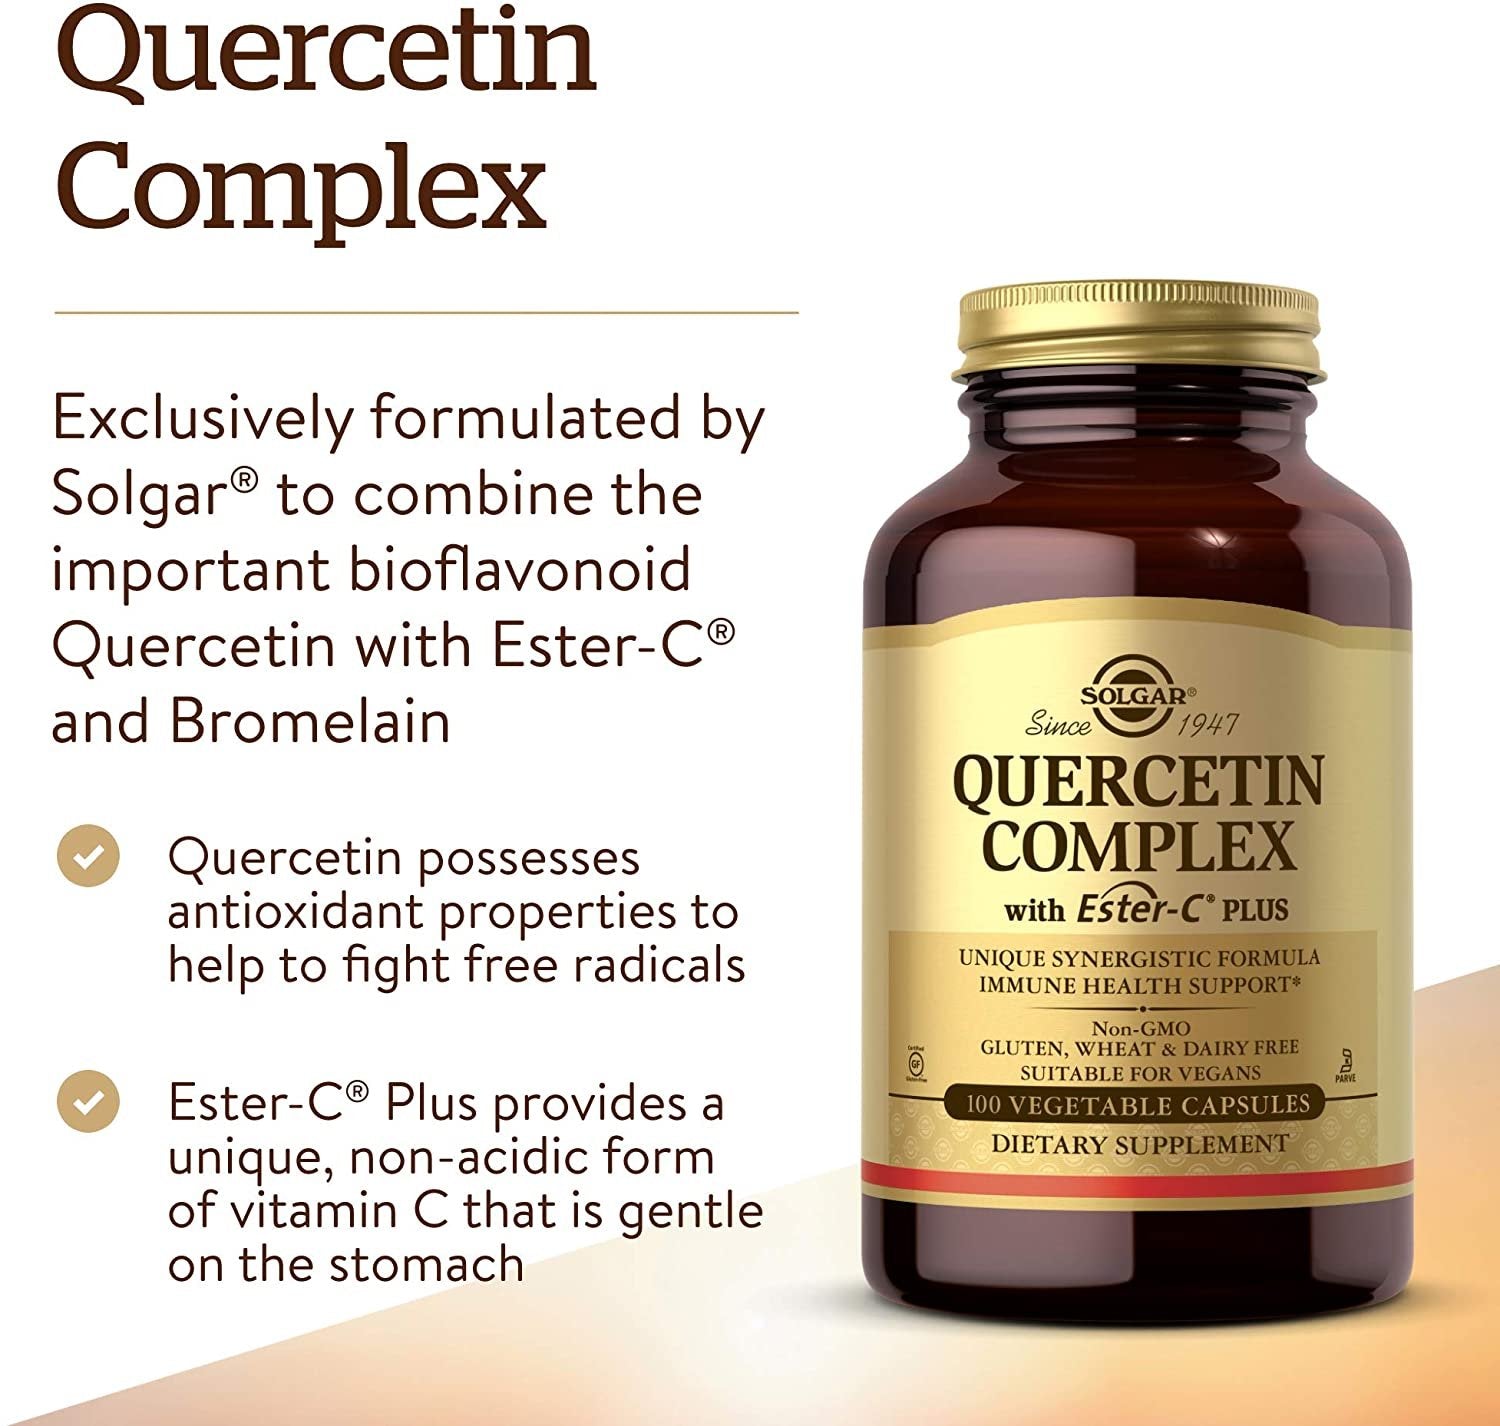 Solgar Quercetin Complex with Ester-C Plus, 100 Vegetable Capsules - Supports Immune Health, Antioxidant - Gentle on the Stomach Vitamin C - Non-GMO, Vegan, Gluten Free, Dairy Free - 50 Servings